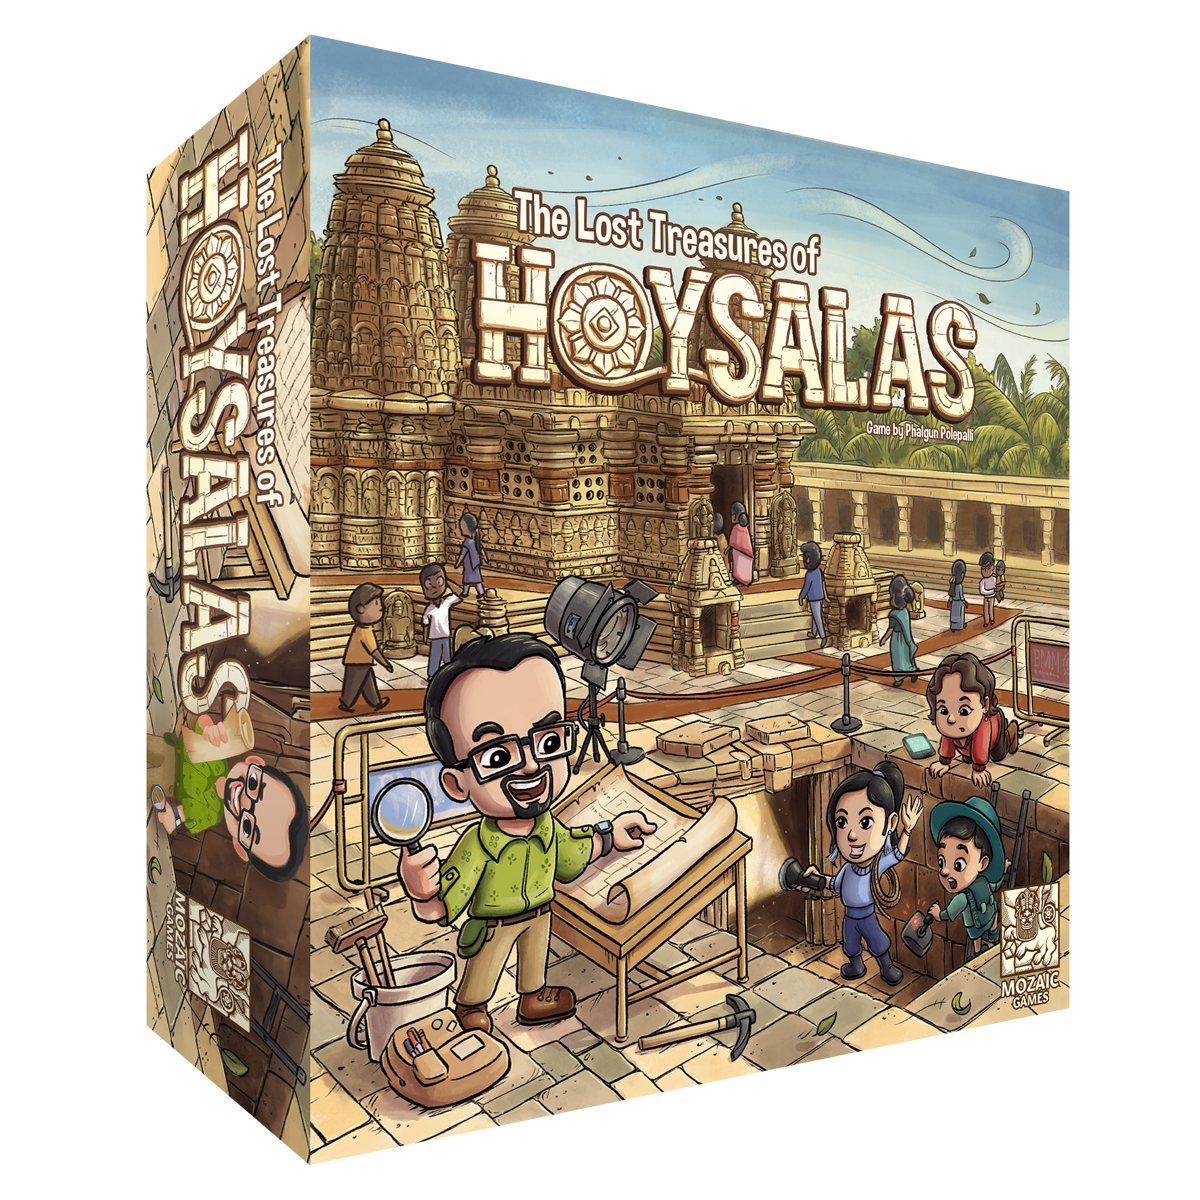 THE LOST TREASURES OF HOYSALAS